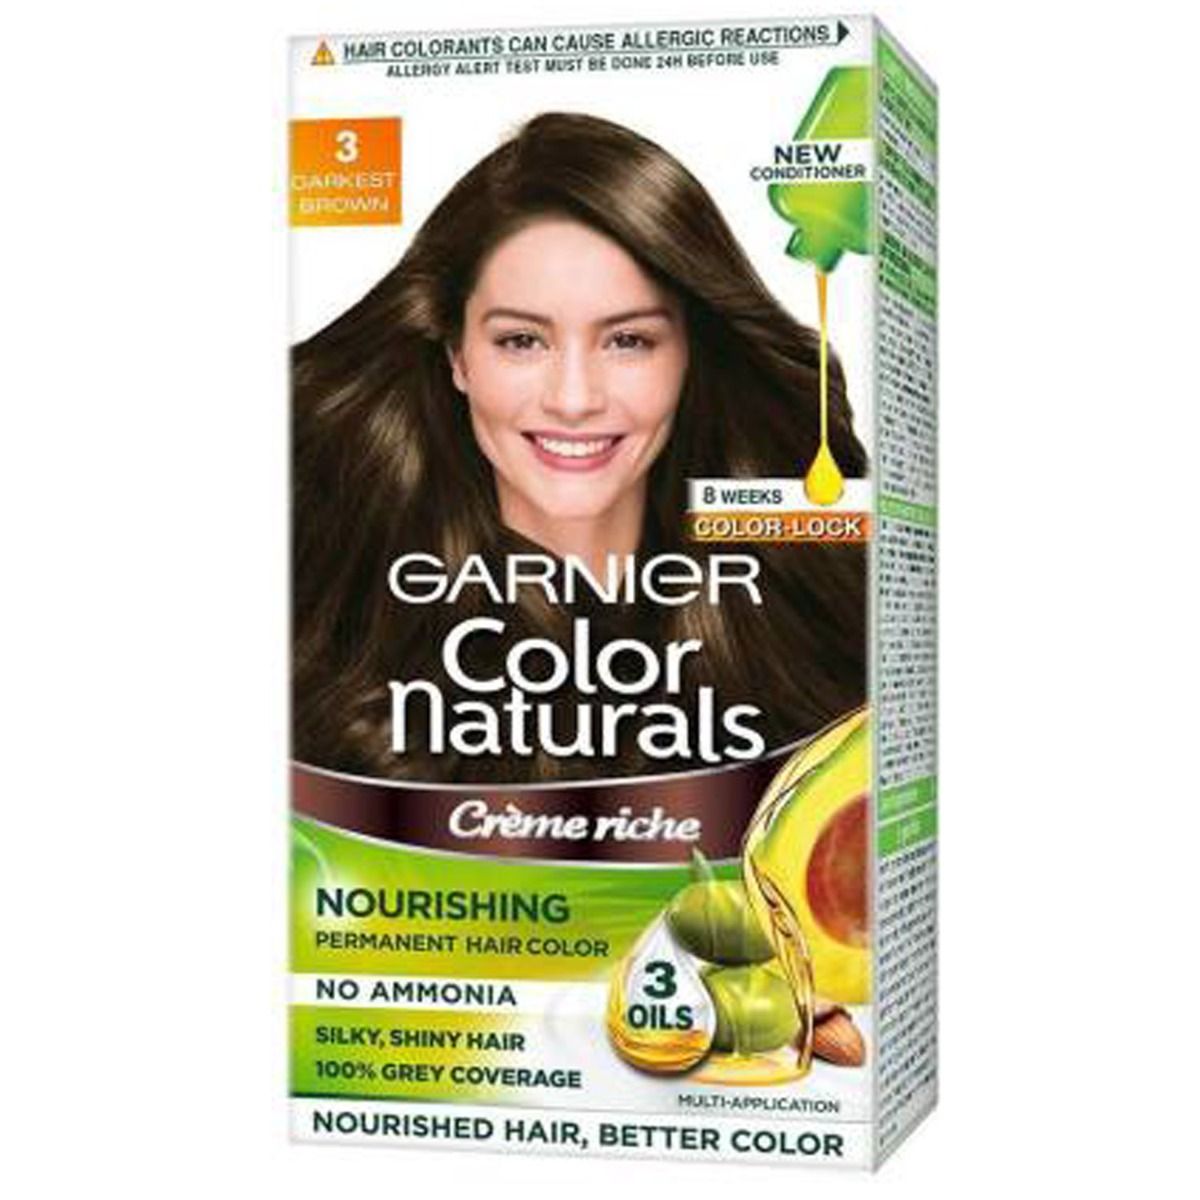 Garnier Color Naturals Men Shade  Hair Color, Burgundy, 1 Count (30ml +  30gm) Price, Uses, Side Effects, Composition - Apollo Pharmacy